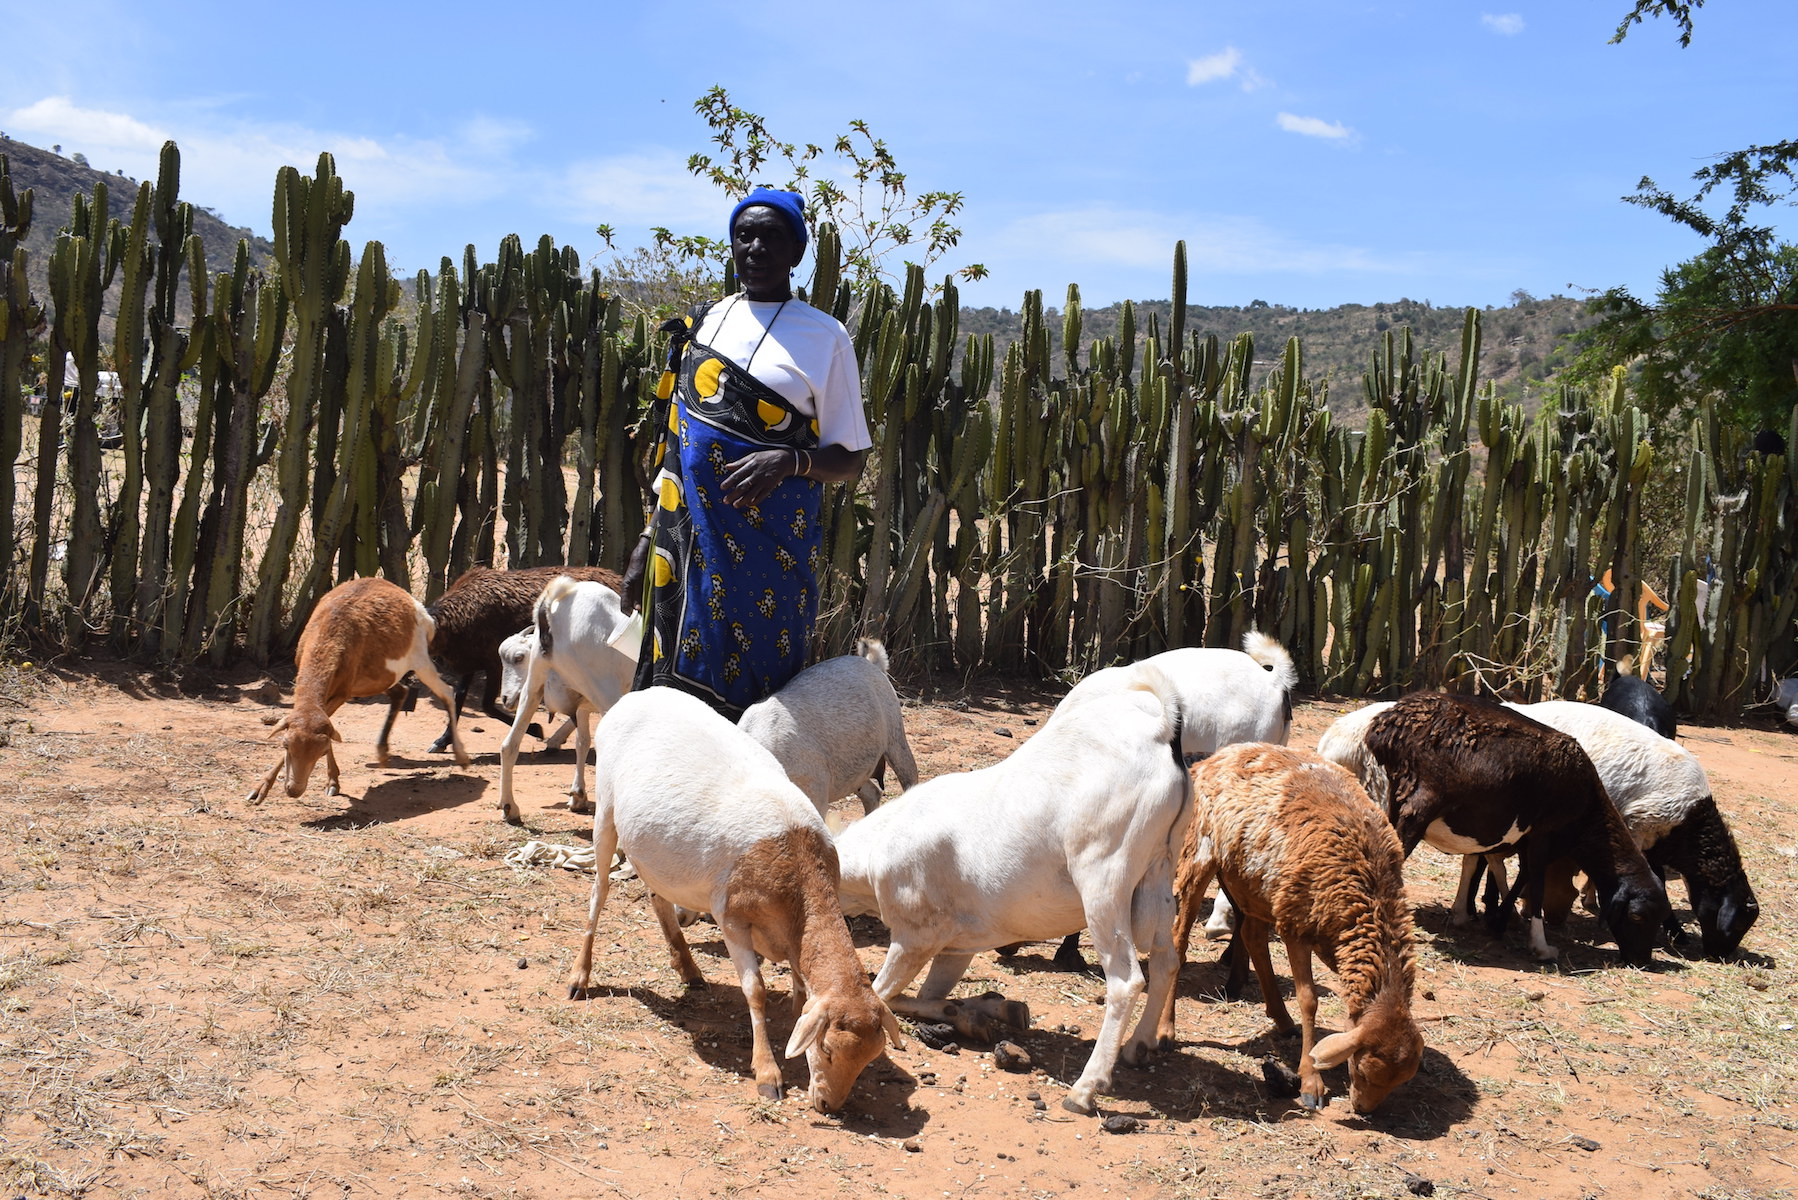 Thanks to the support of World Vision in Kenya, Chepurai now makes money from livestock farming instead of circumcising girls. @World Vision/Photo by Sarah Ooko.